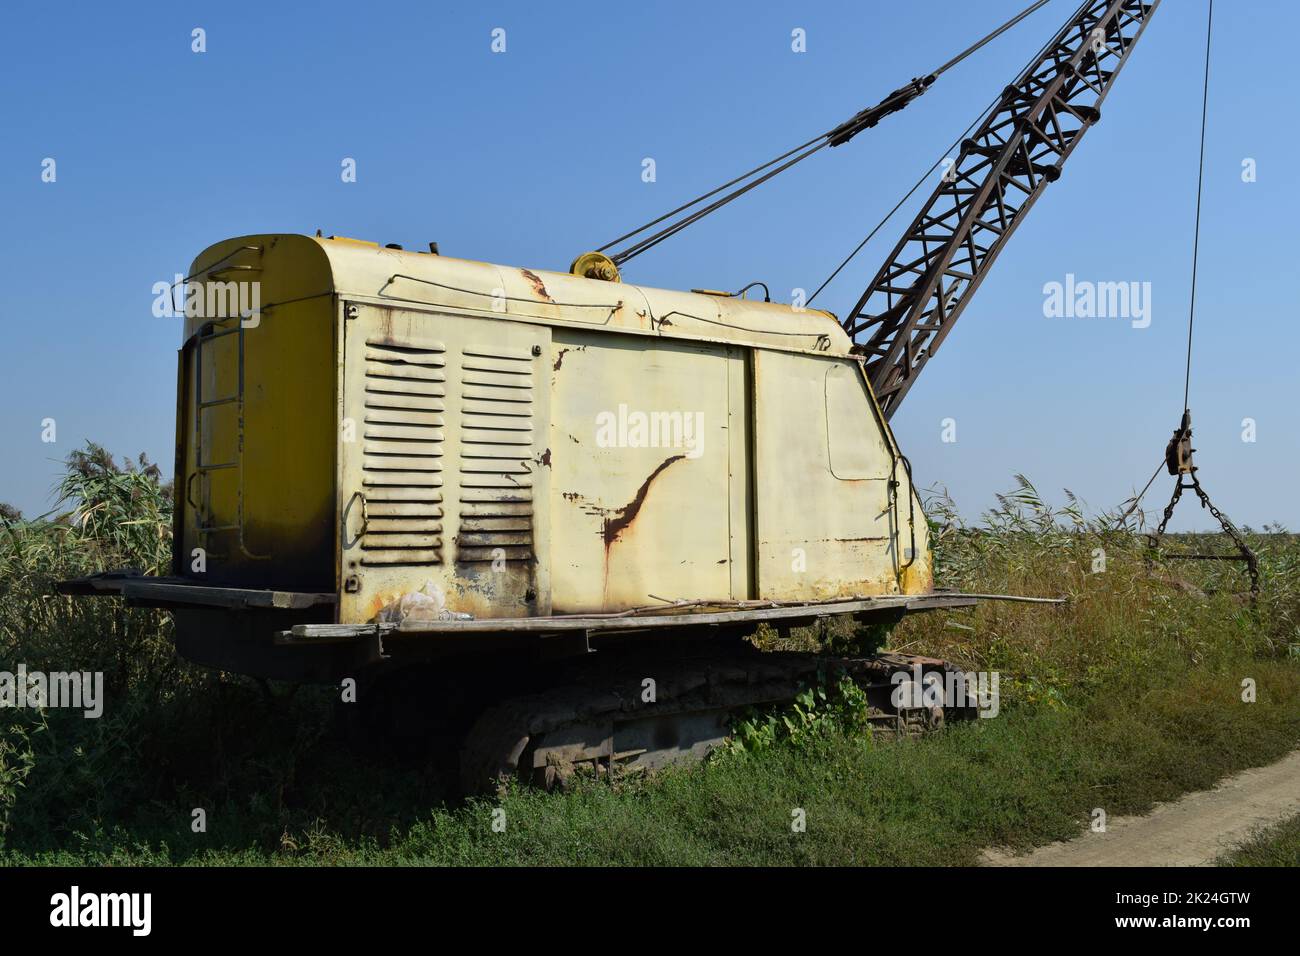 Old quarry near the dragline. Old equipment for digging the soil in canals and quarries. Stock Photo